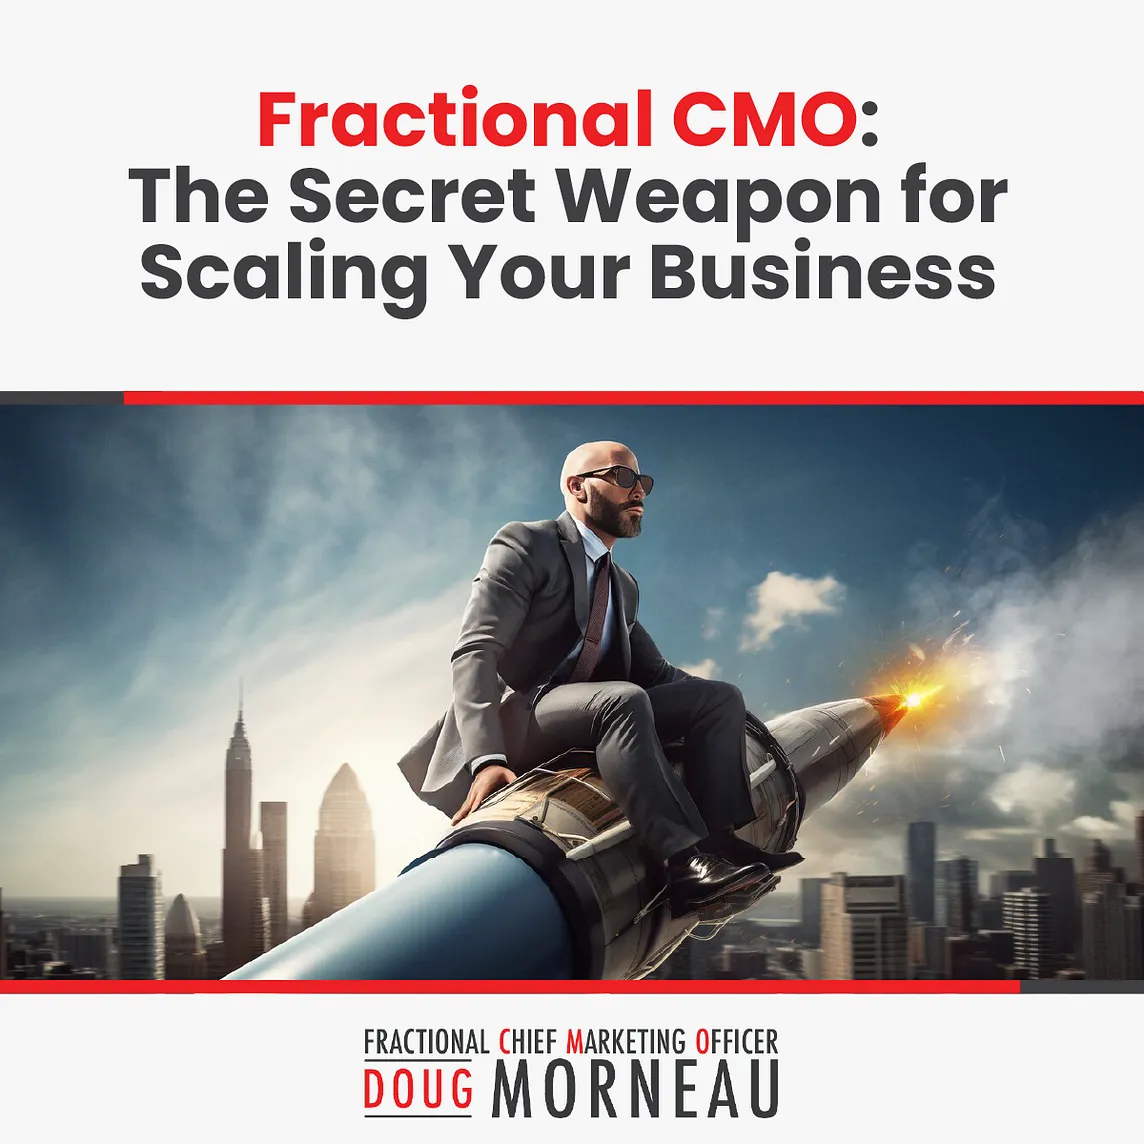 Fractional CMO: The Secret Weapon for Scaling Your Business